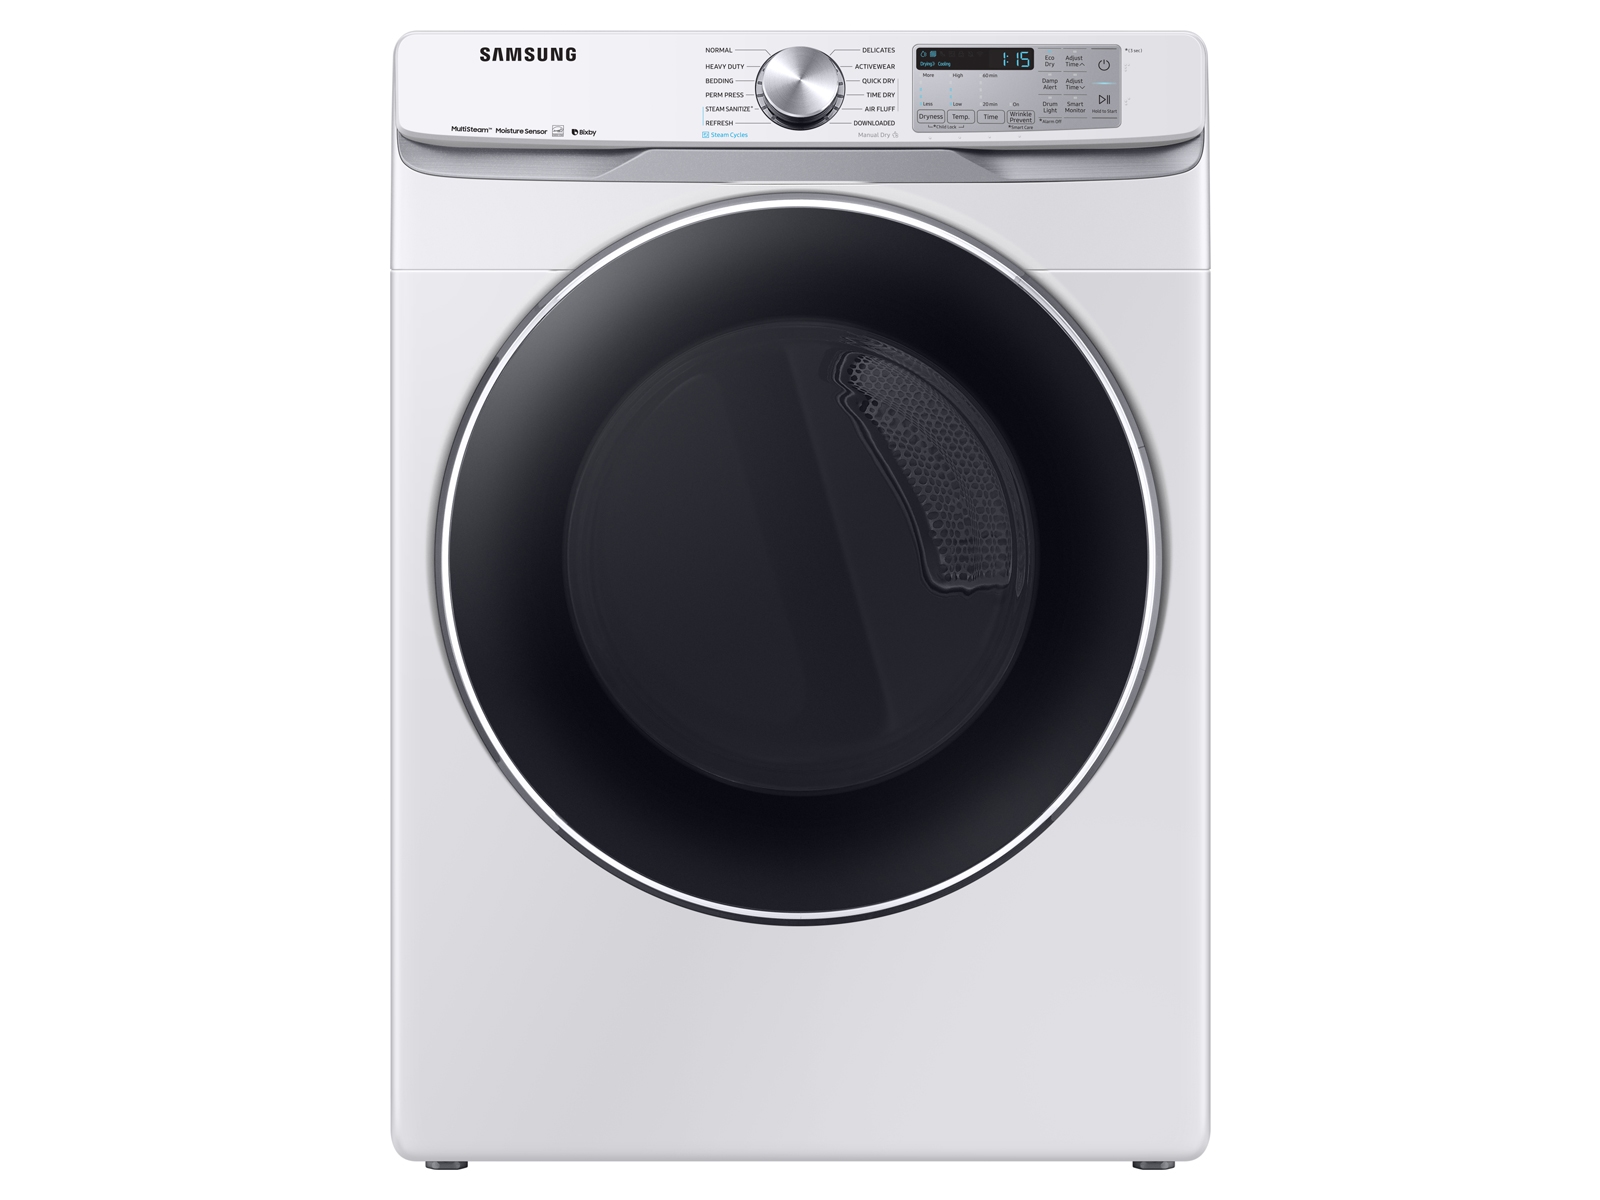 Photos - Tumble Dryer Samsung 7.5 cu. ft. Smart Gas Dryer with Steam Sanitize+ in White(DVG45R63 